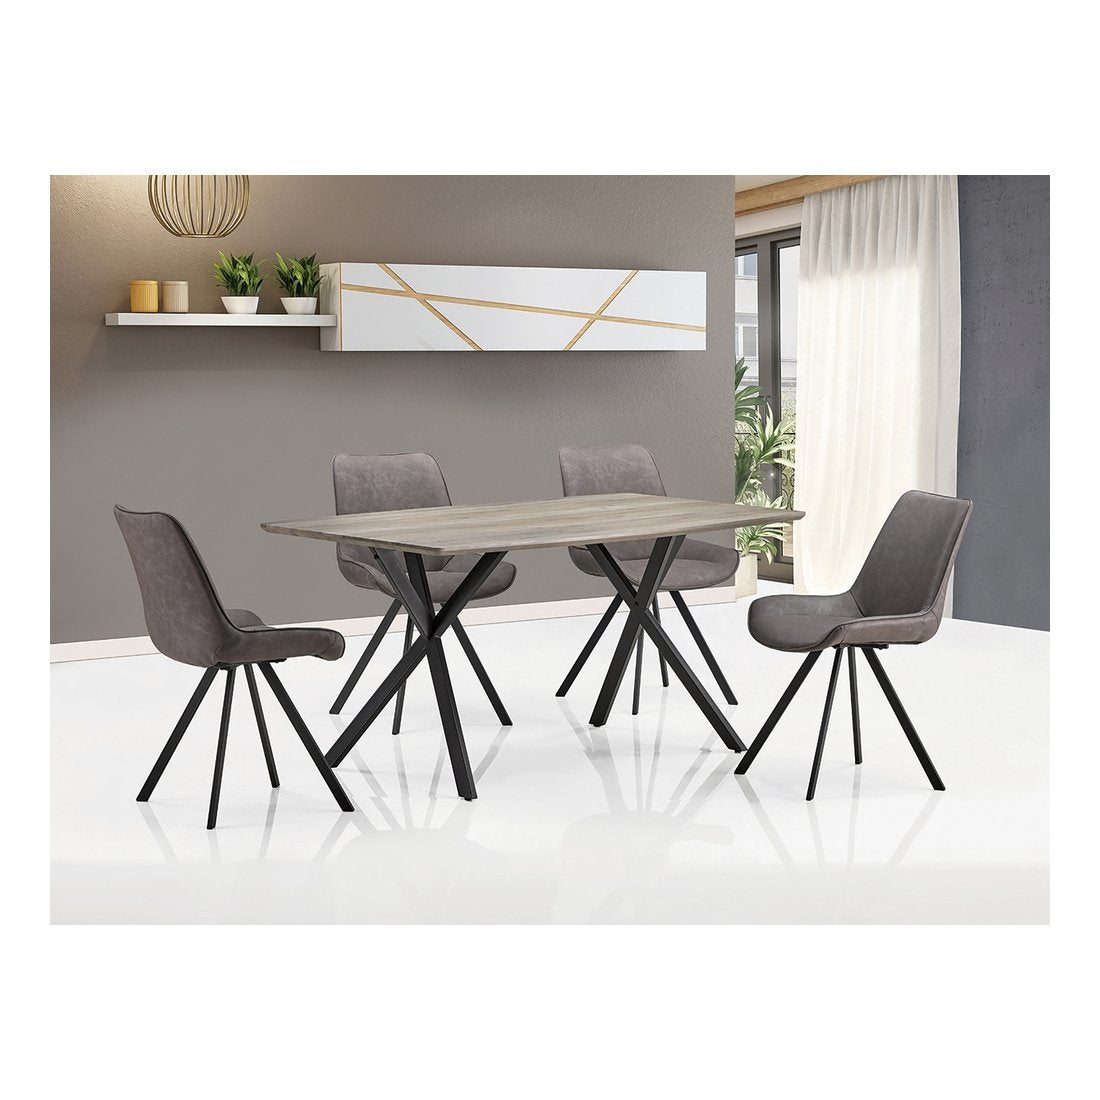 Rox Dining Table